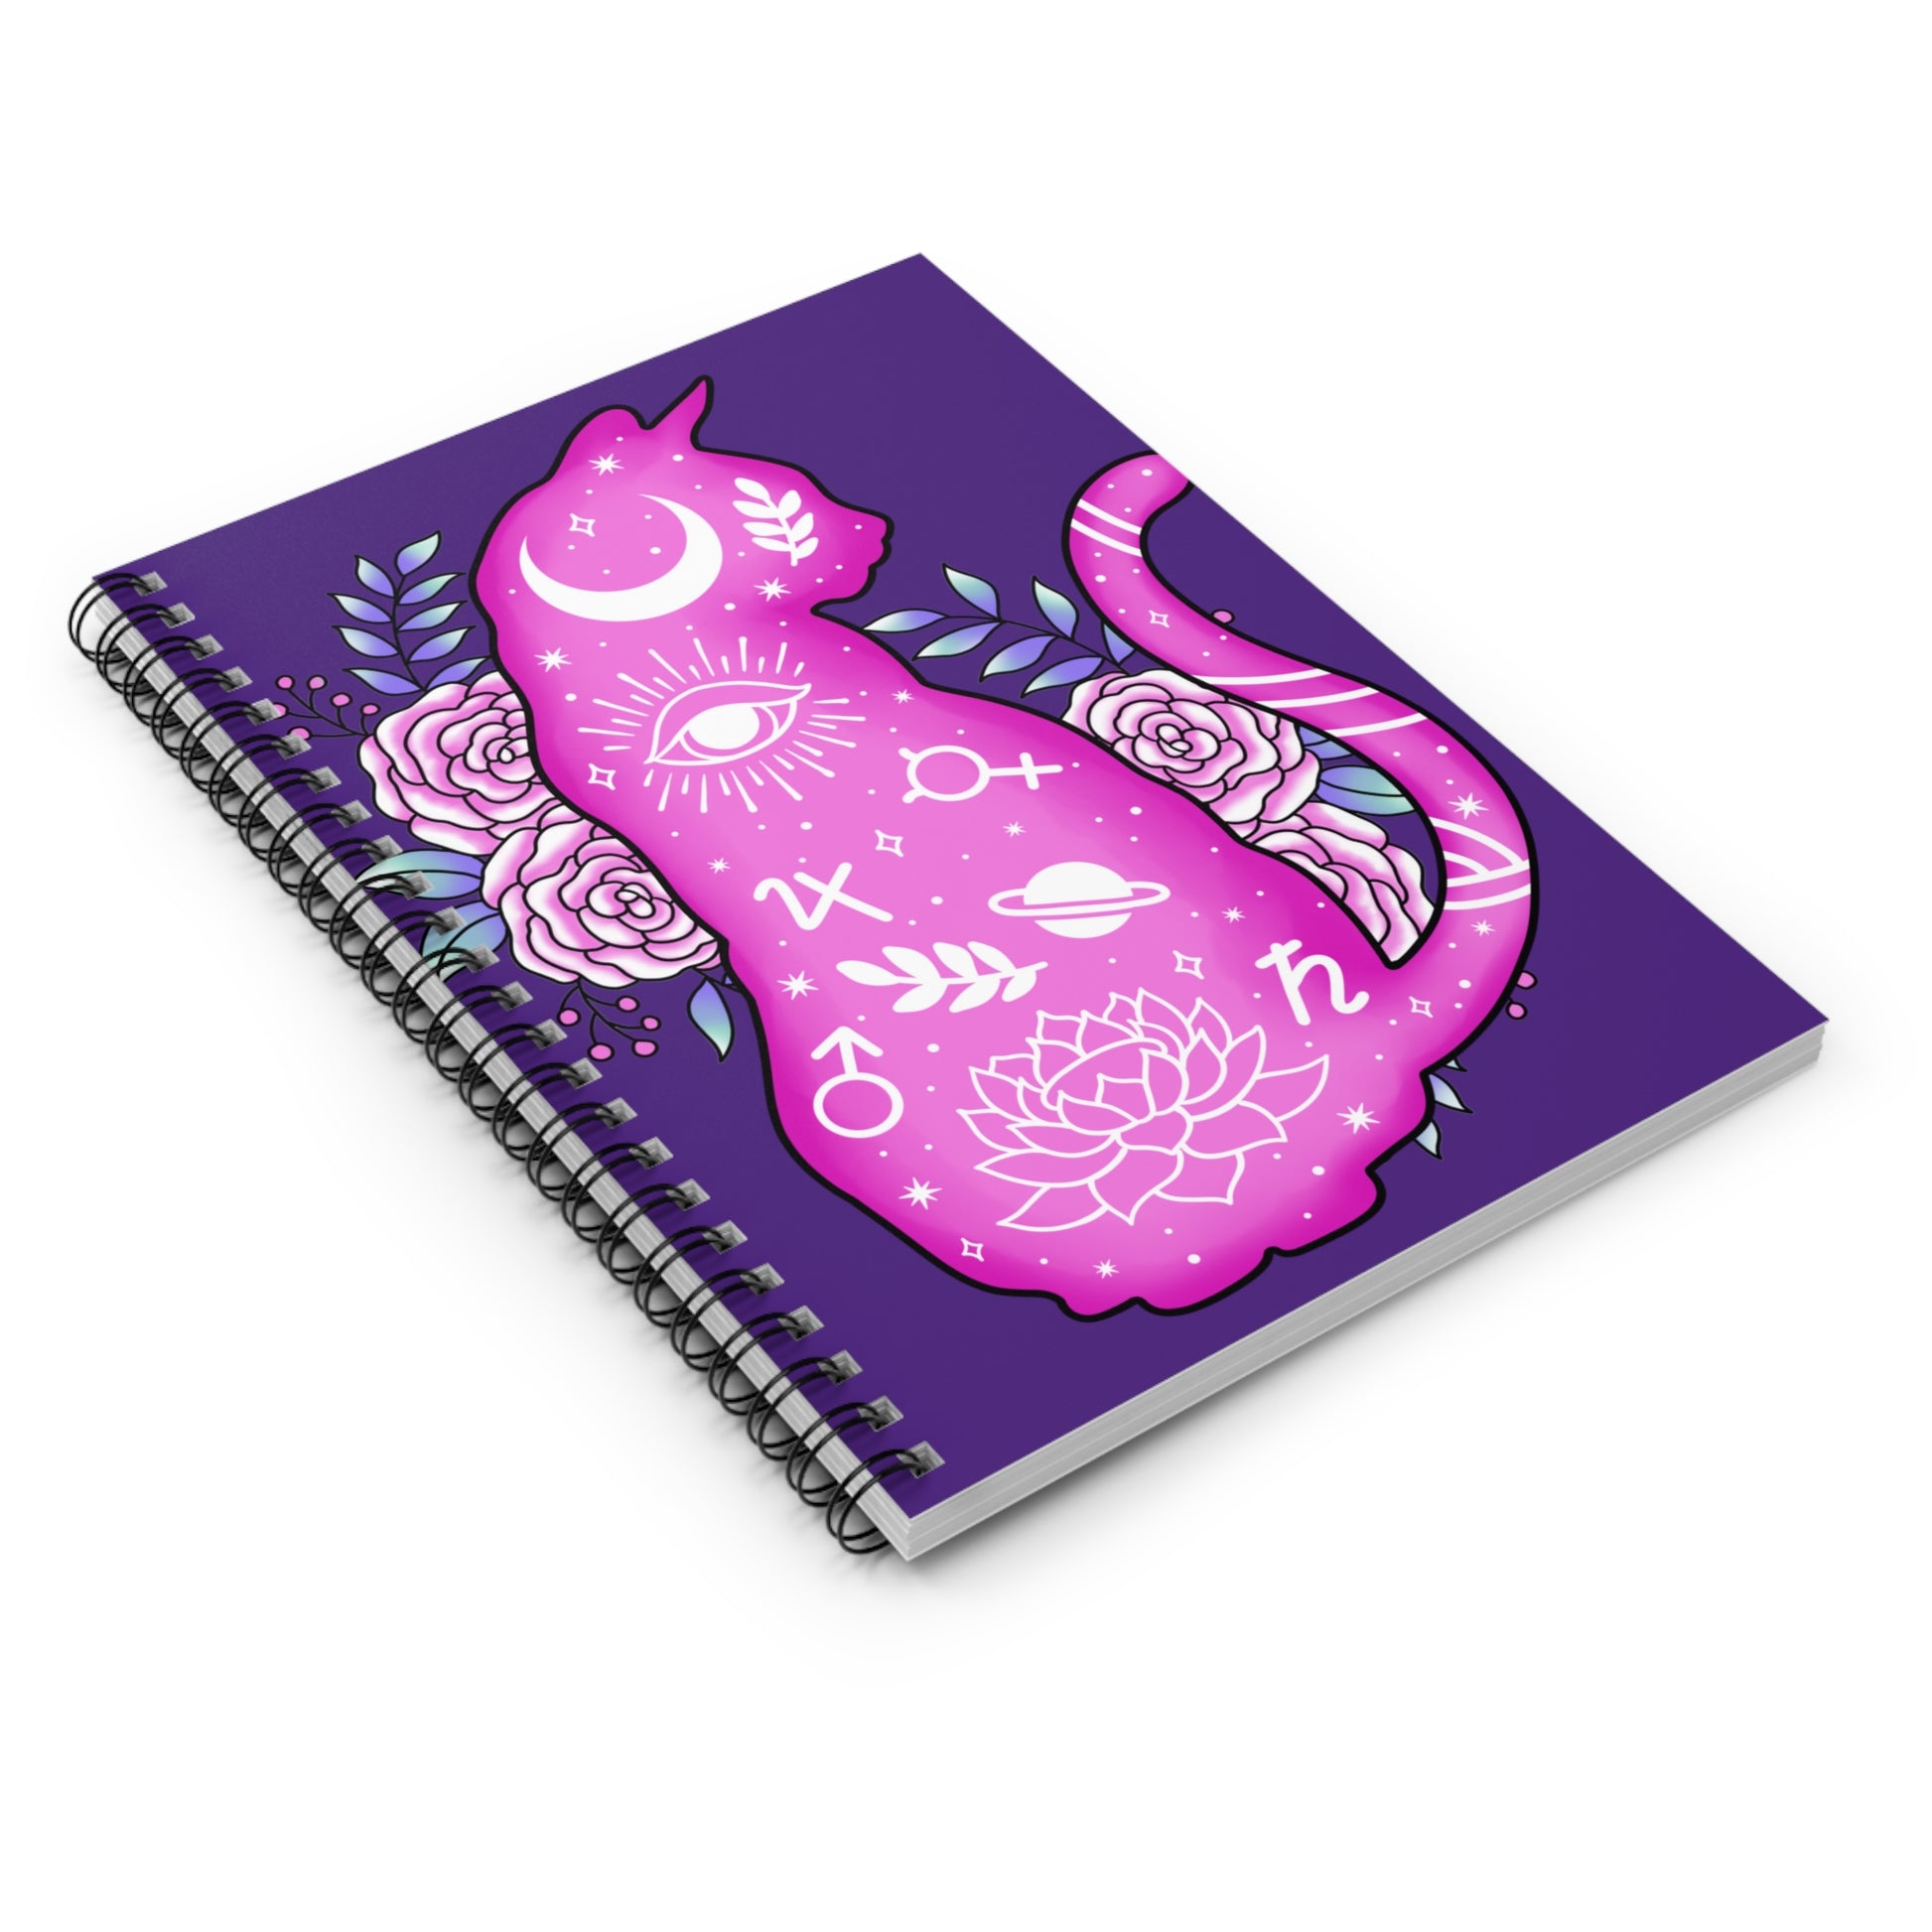 Astral Familiar - I Love You: Spiral Notebook - Log Books - Journals - Diaries - and More Custom Printed by TheGlassyLass